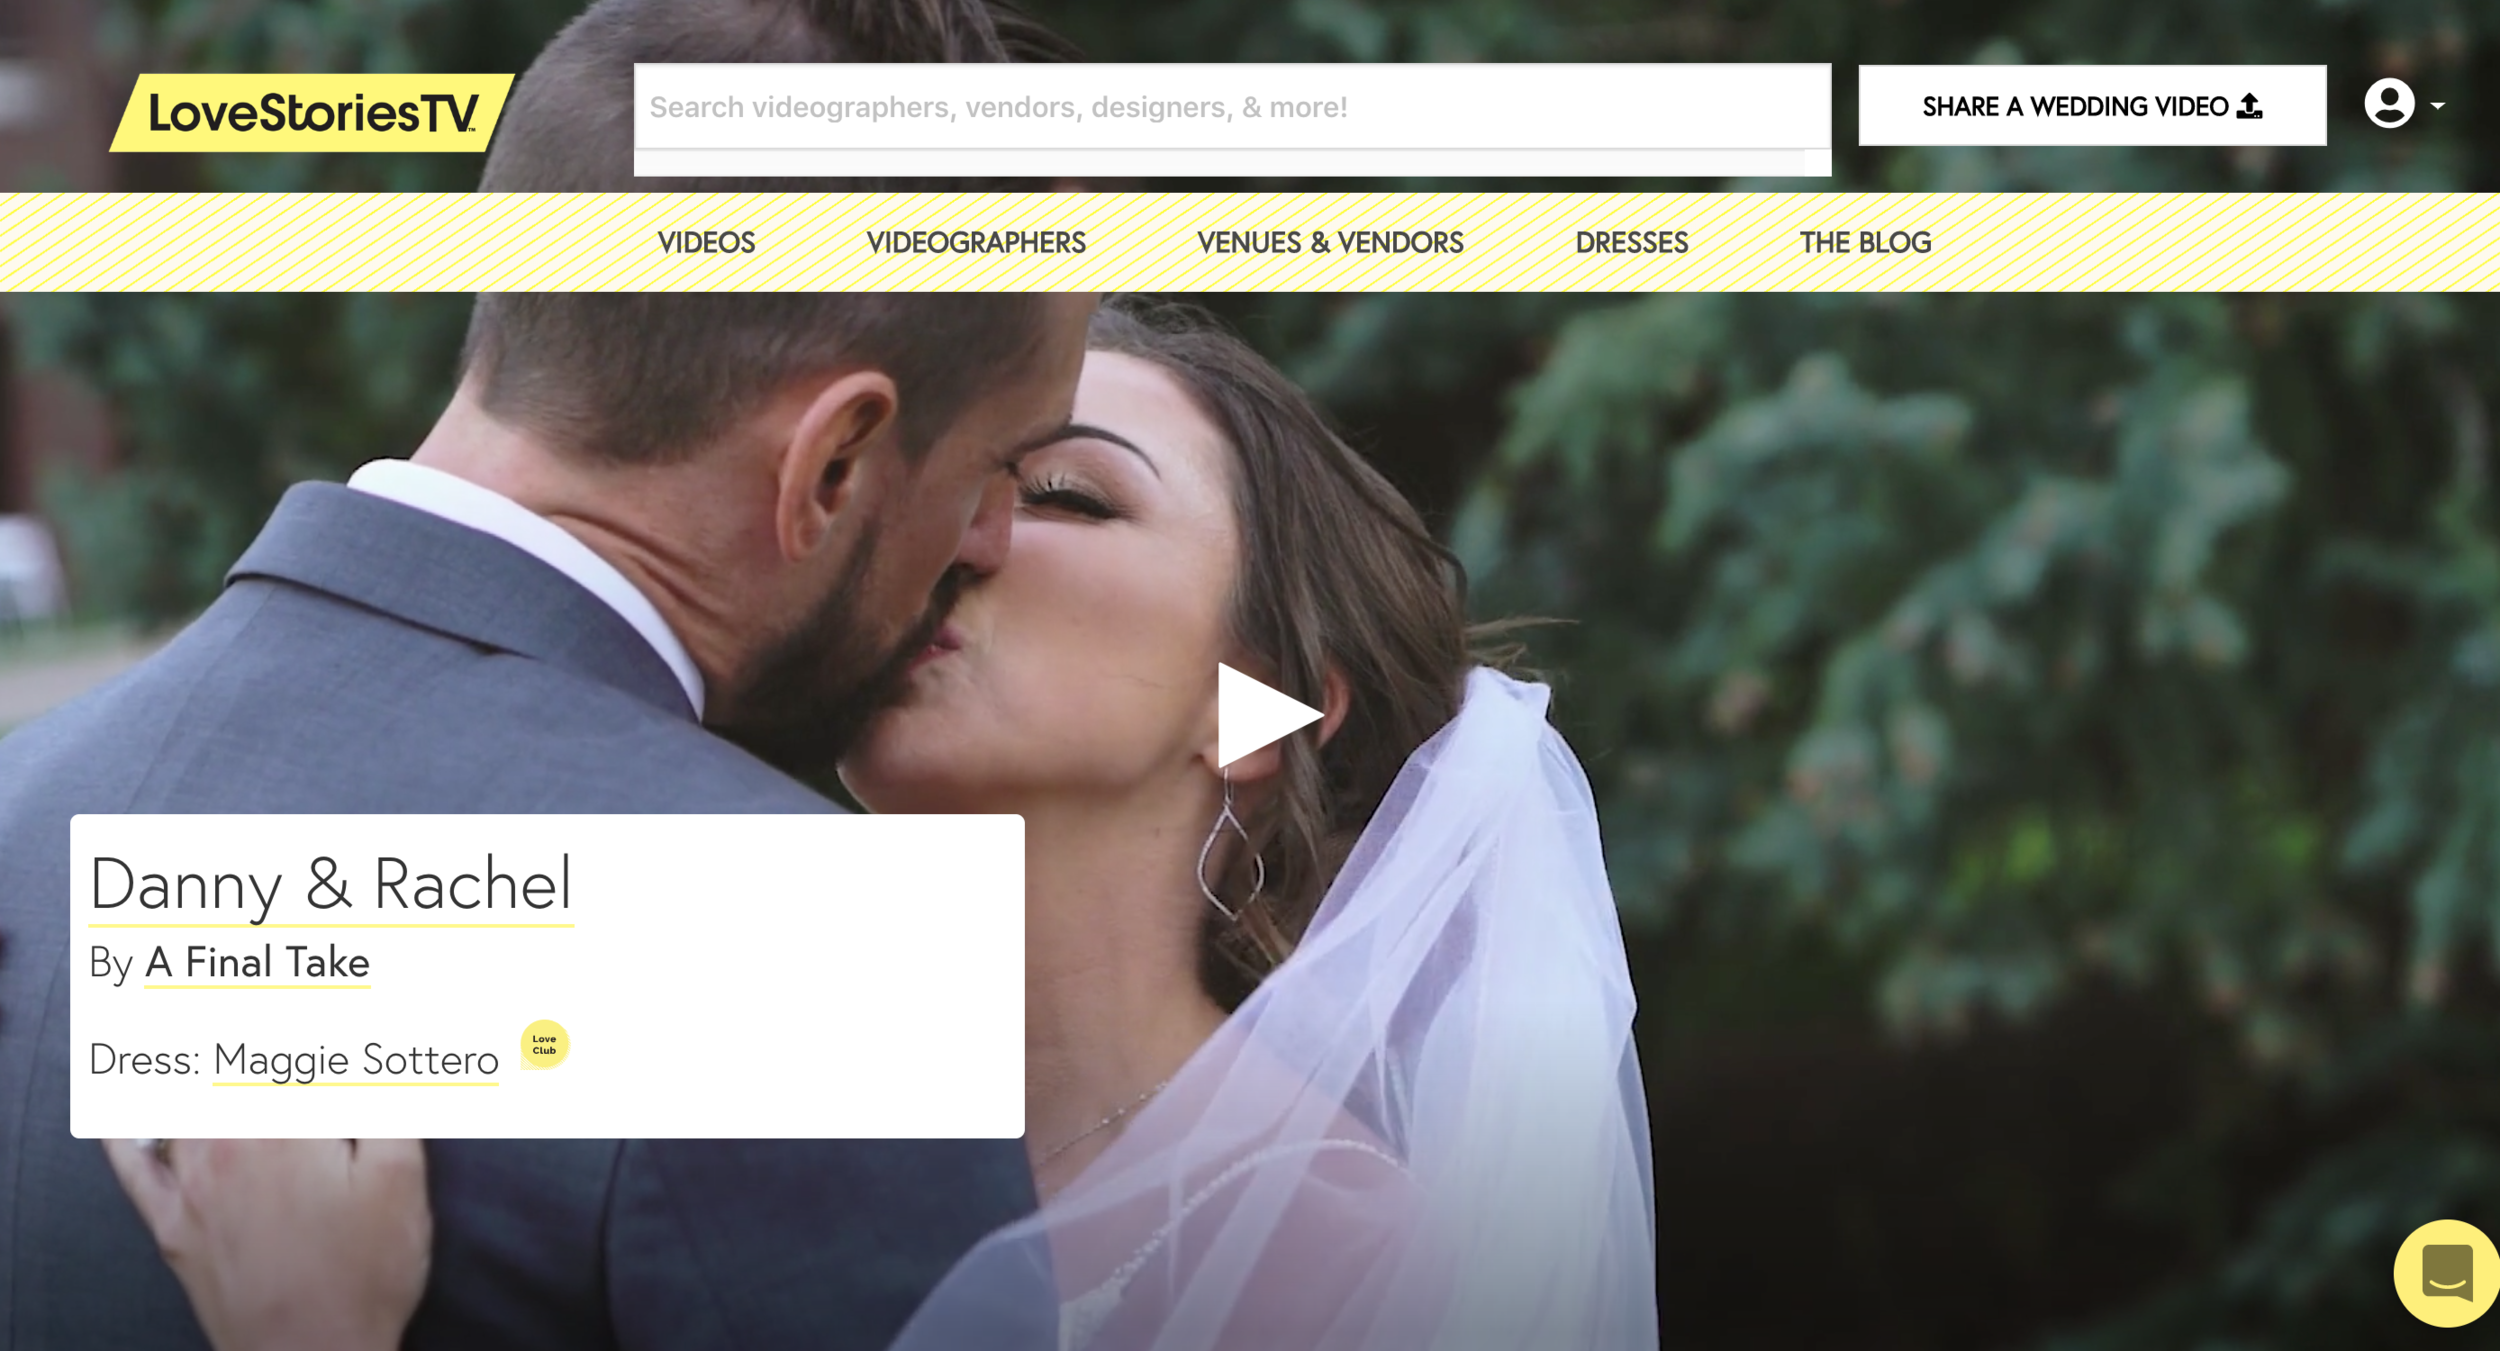 Nationally Featured on Love Stories TV